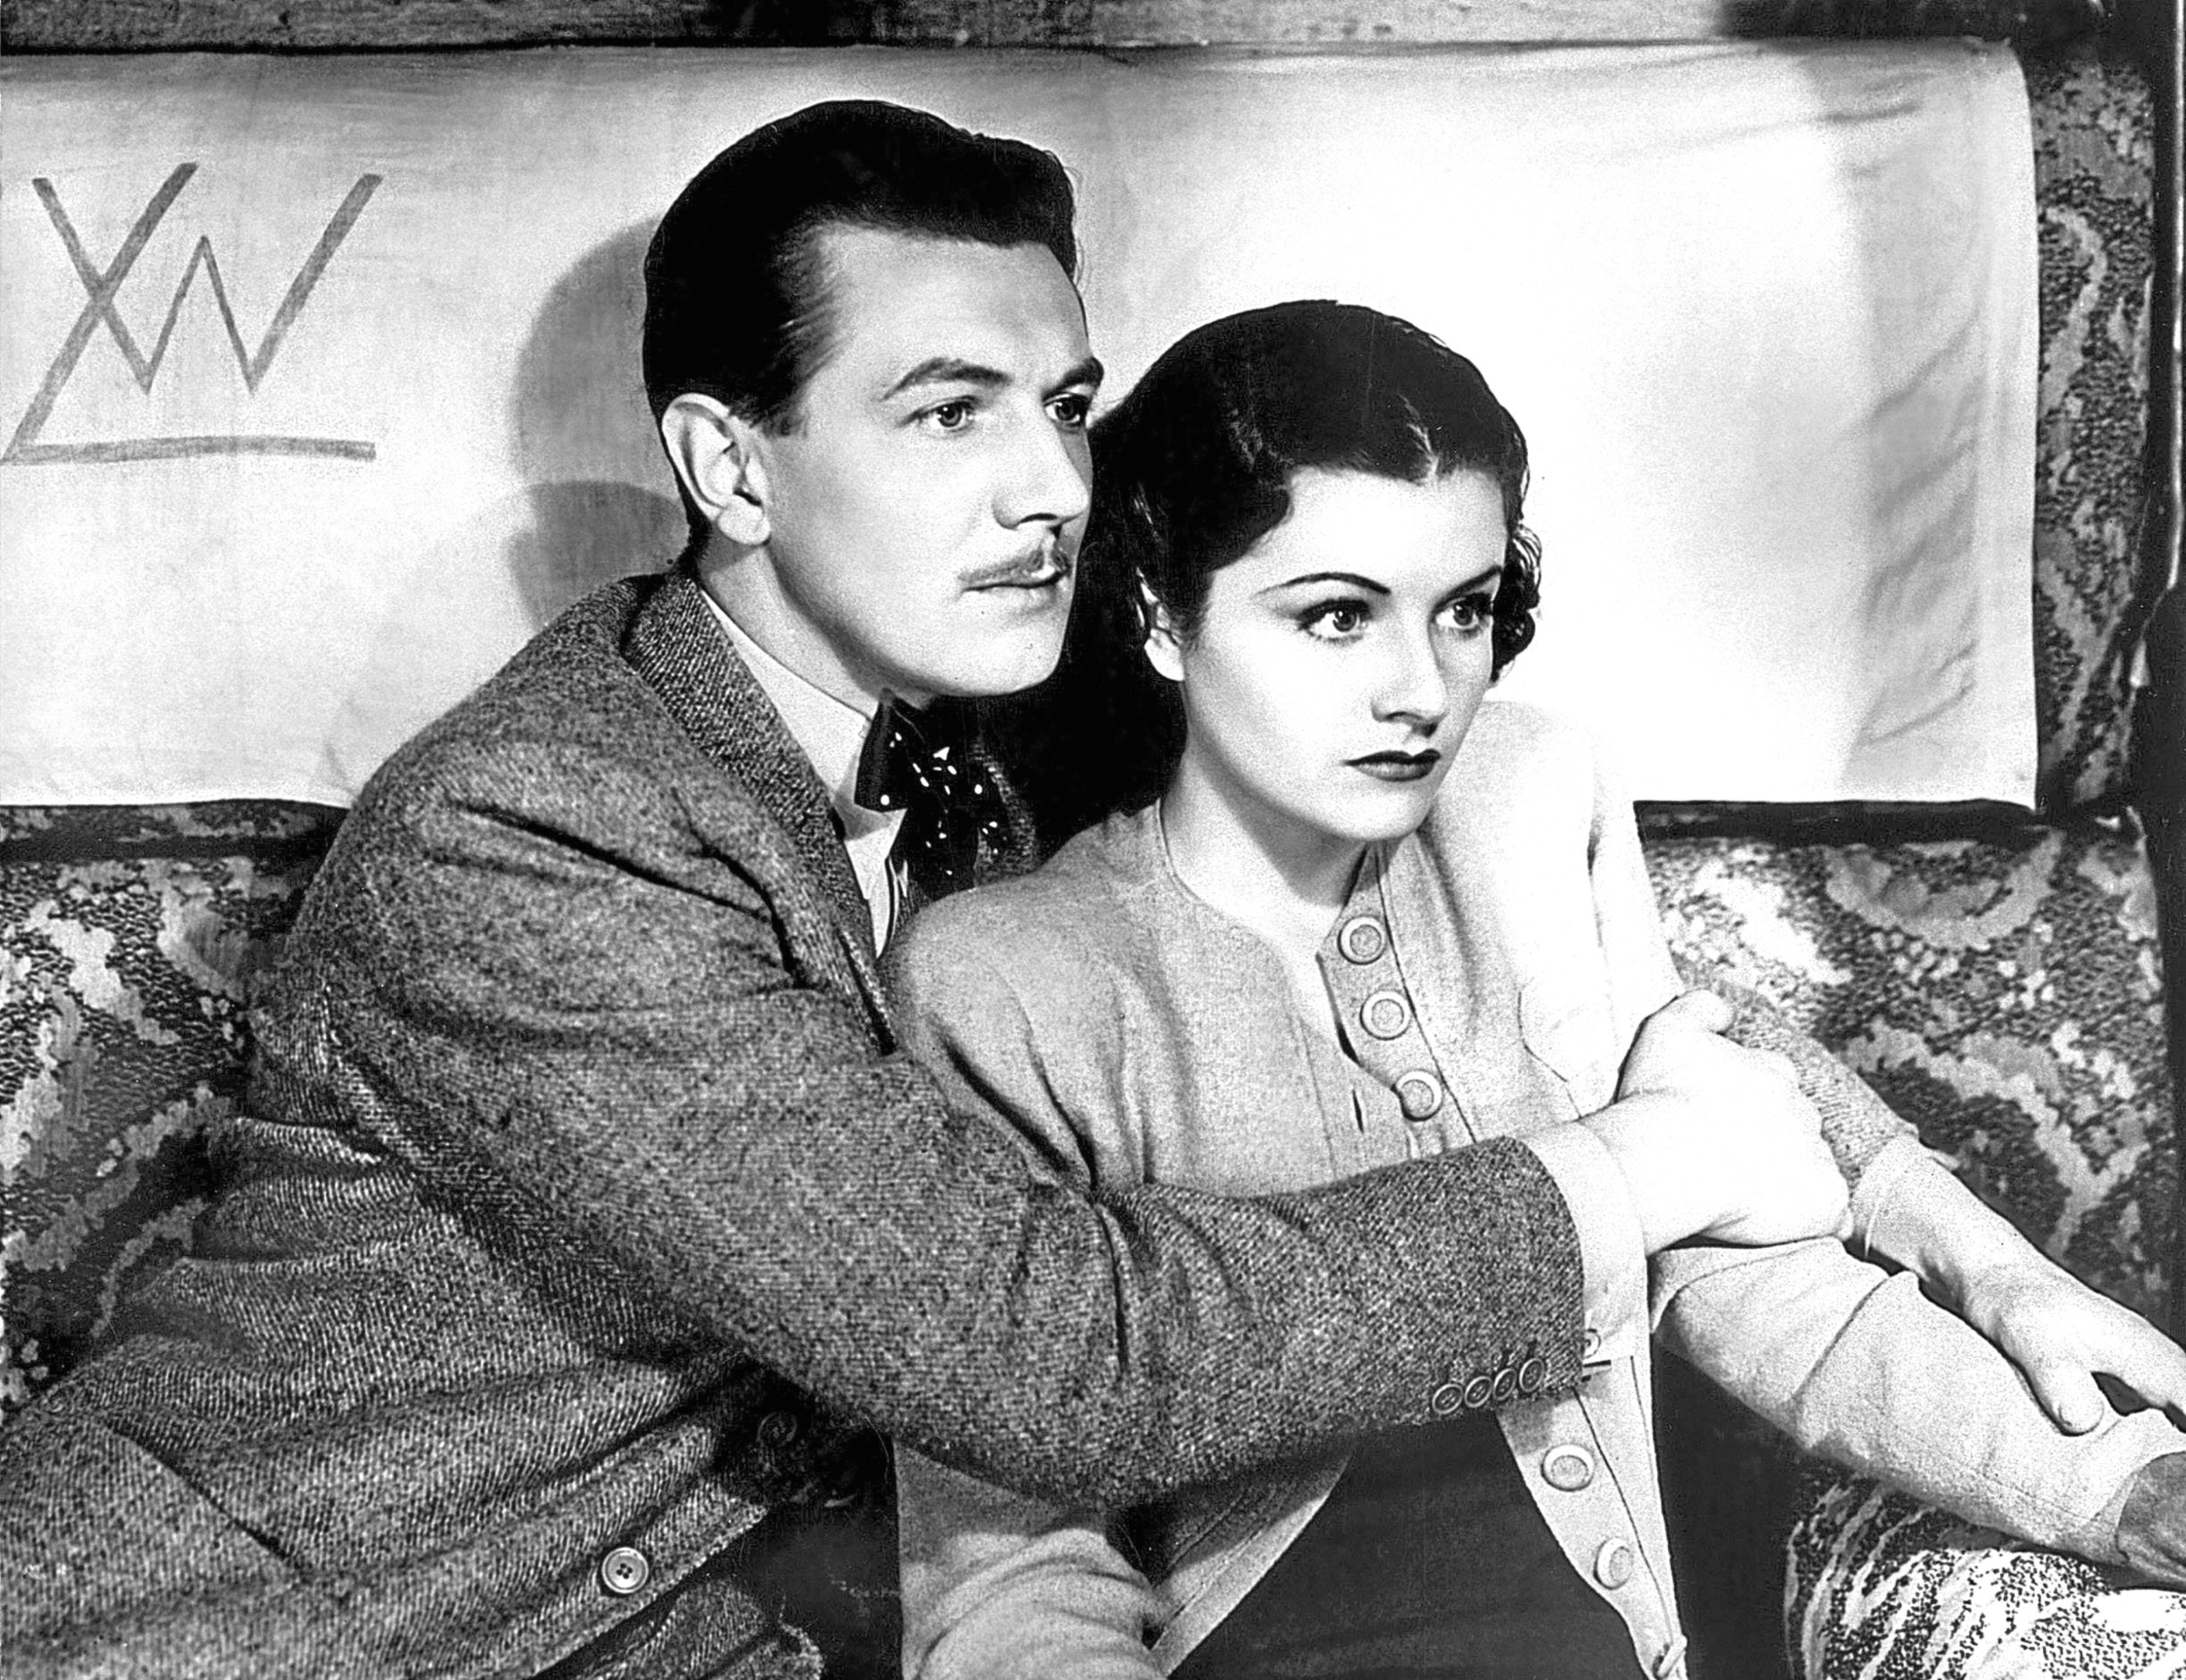 MICHAEL REDGRAVE & MARGARET LOCKWOOD Character(s): Gilbert & Iris Henderson Film 'THE LADY VANISHES' (1938) Directed By ALFRED HITCHCOCK (Allstar/GAINSBOROUGH)